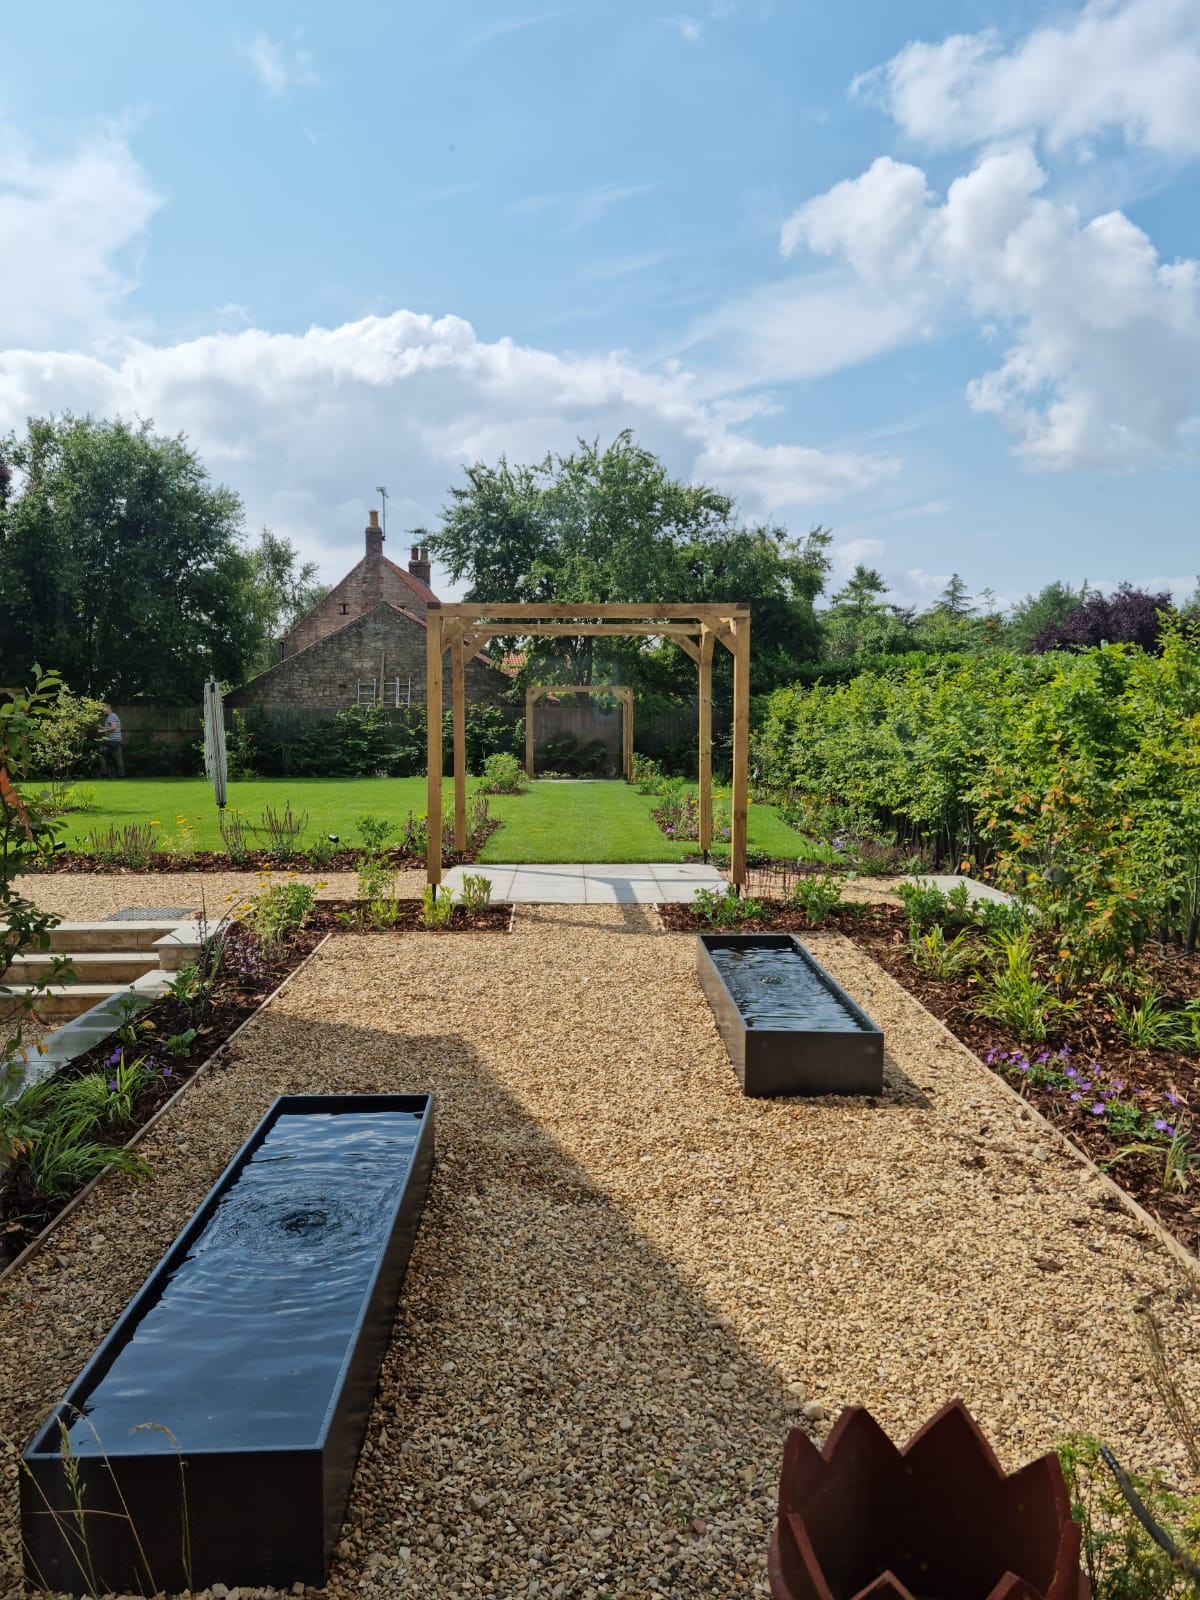 Architectural New Build with integrated Garden Design